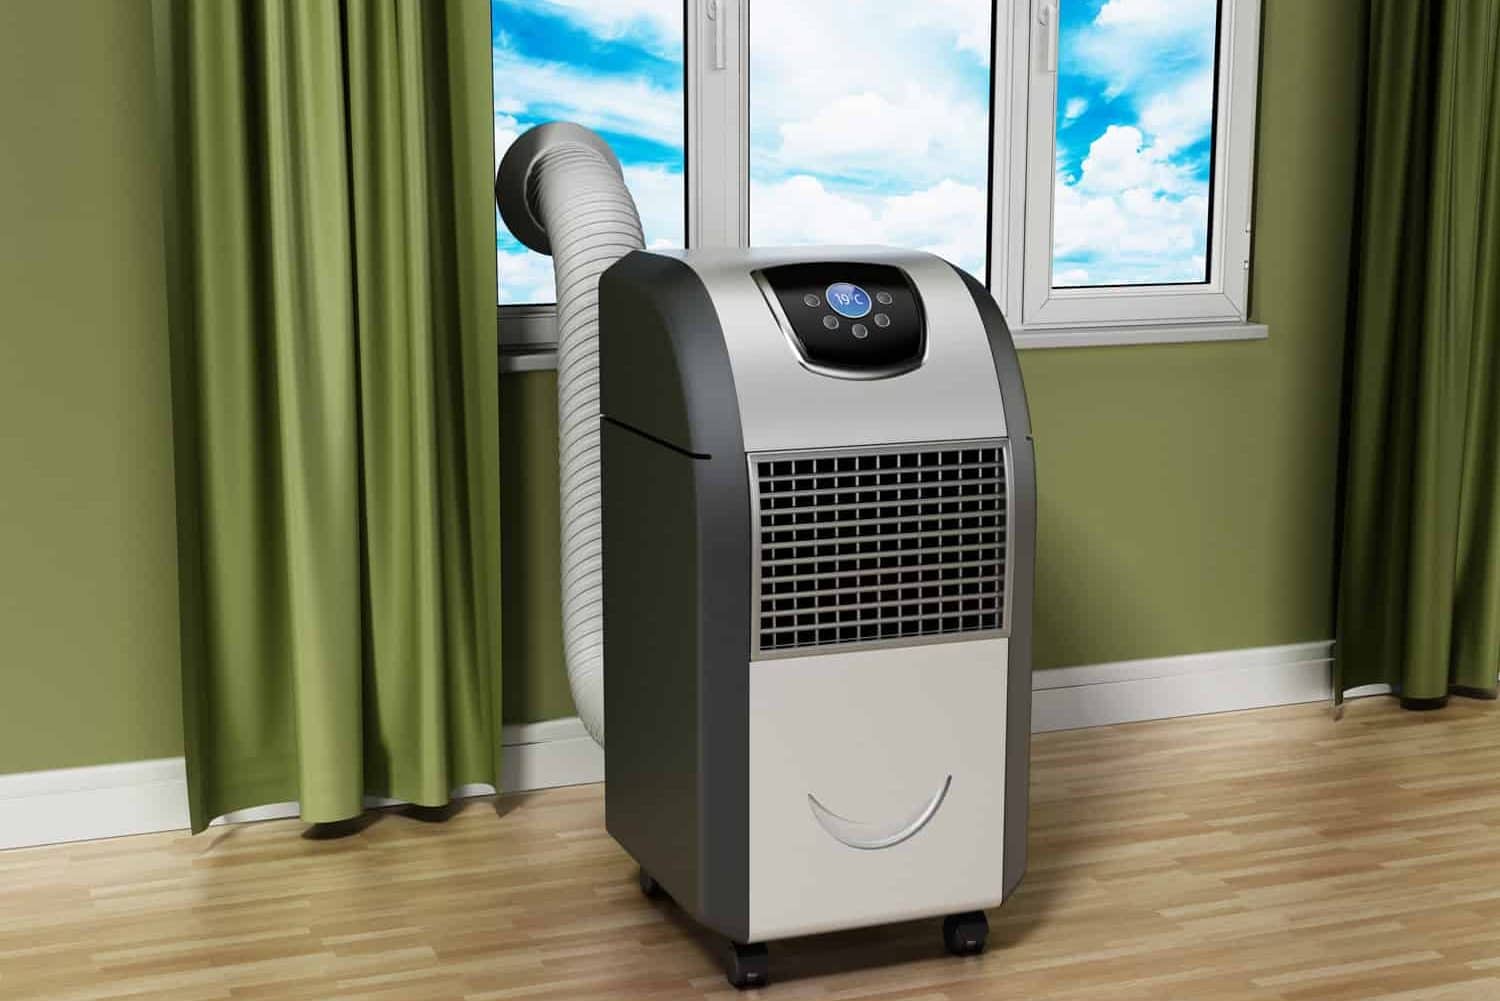 Generic portable air conditioner standing near the window in the room.